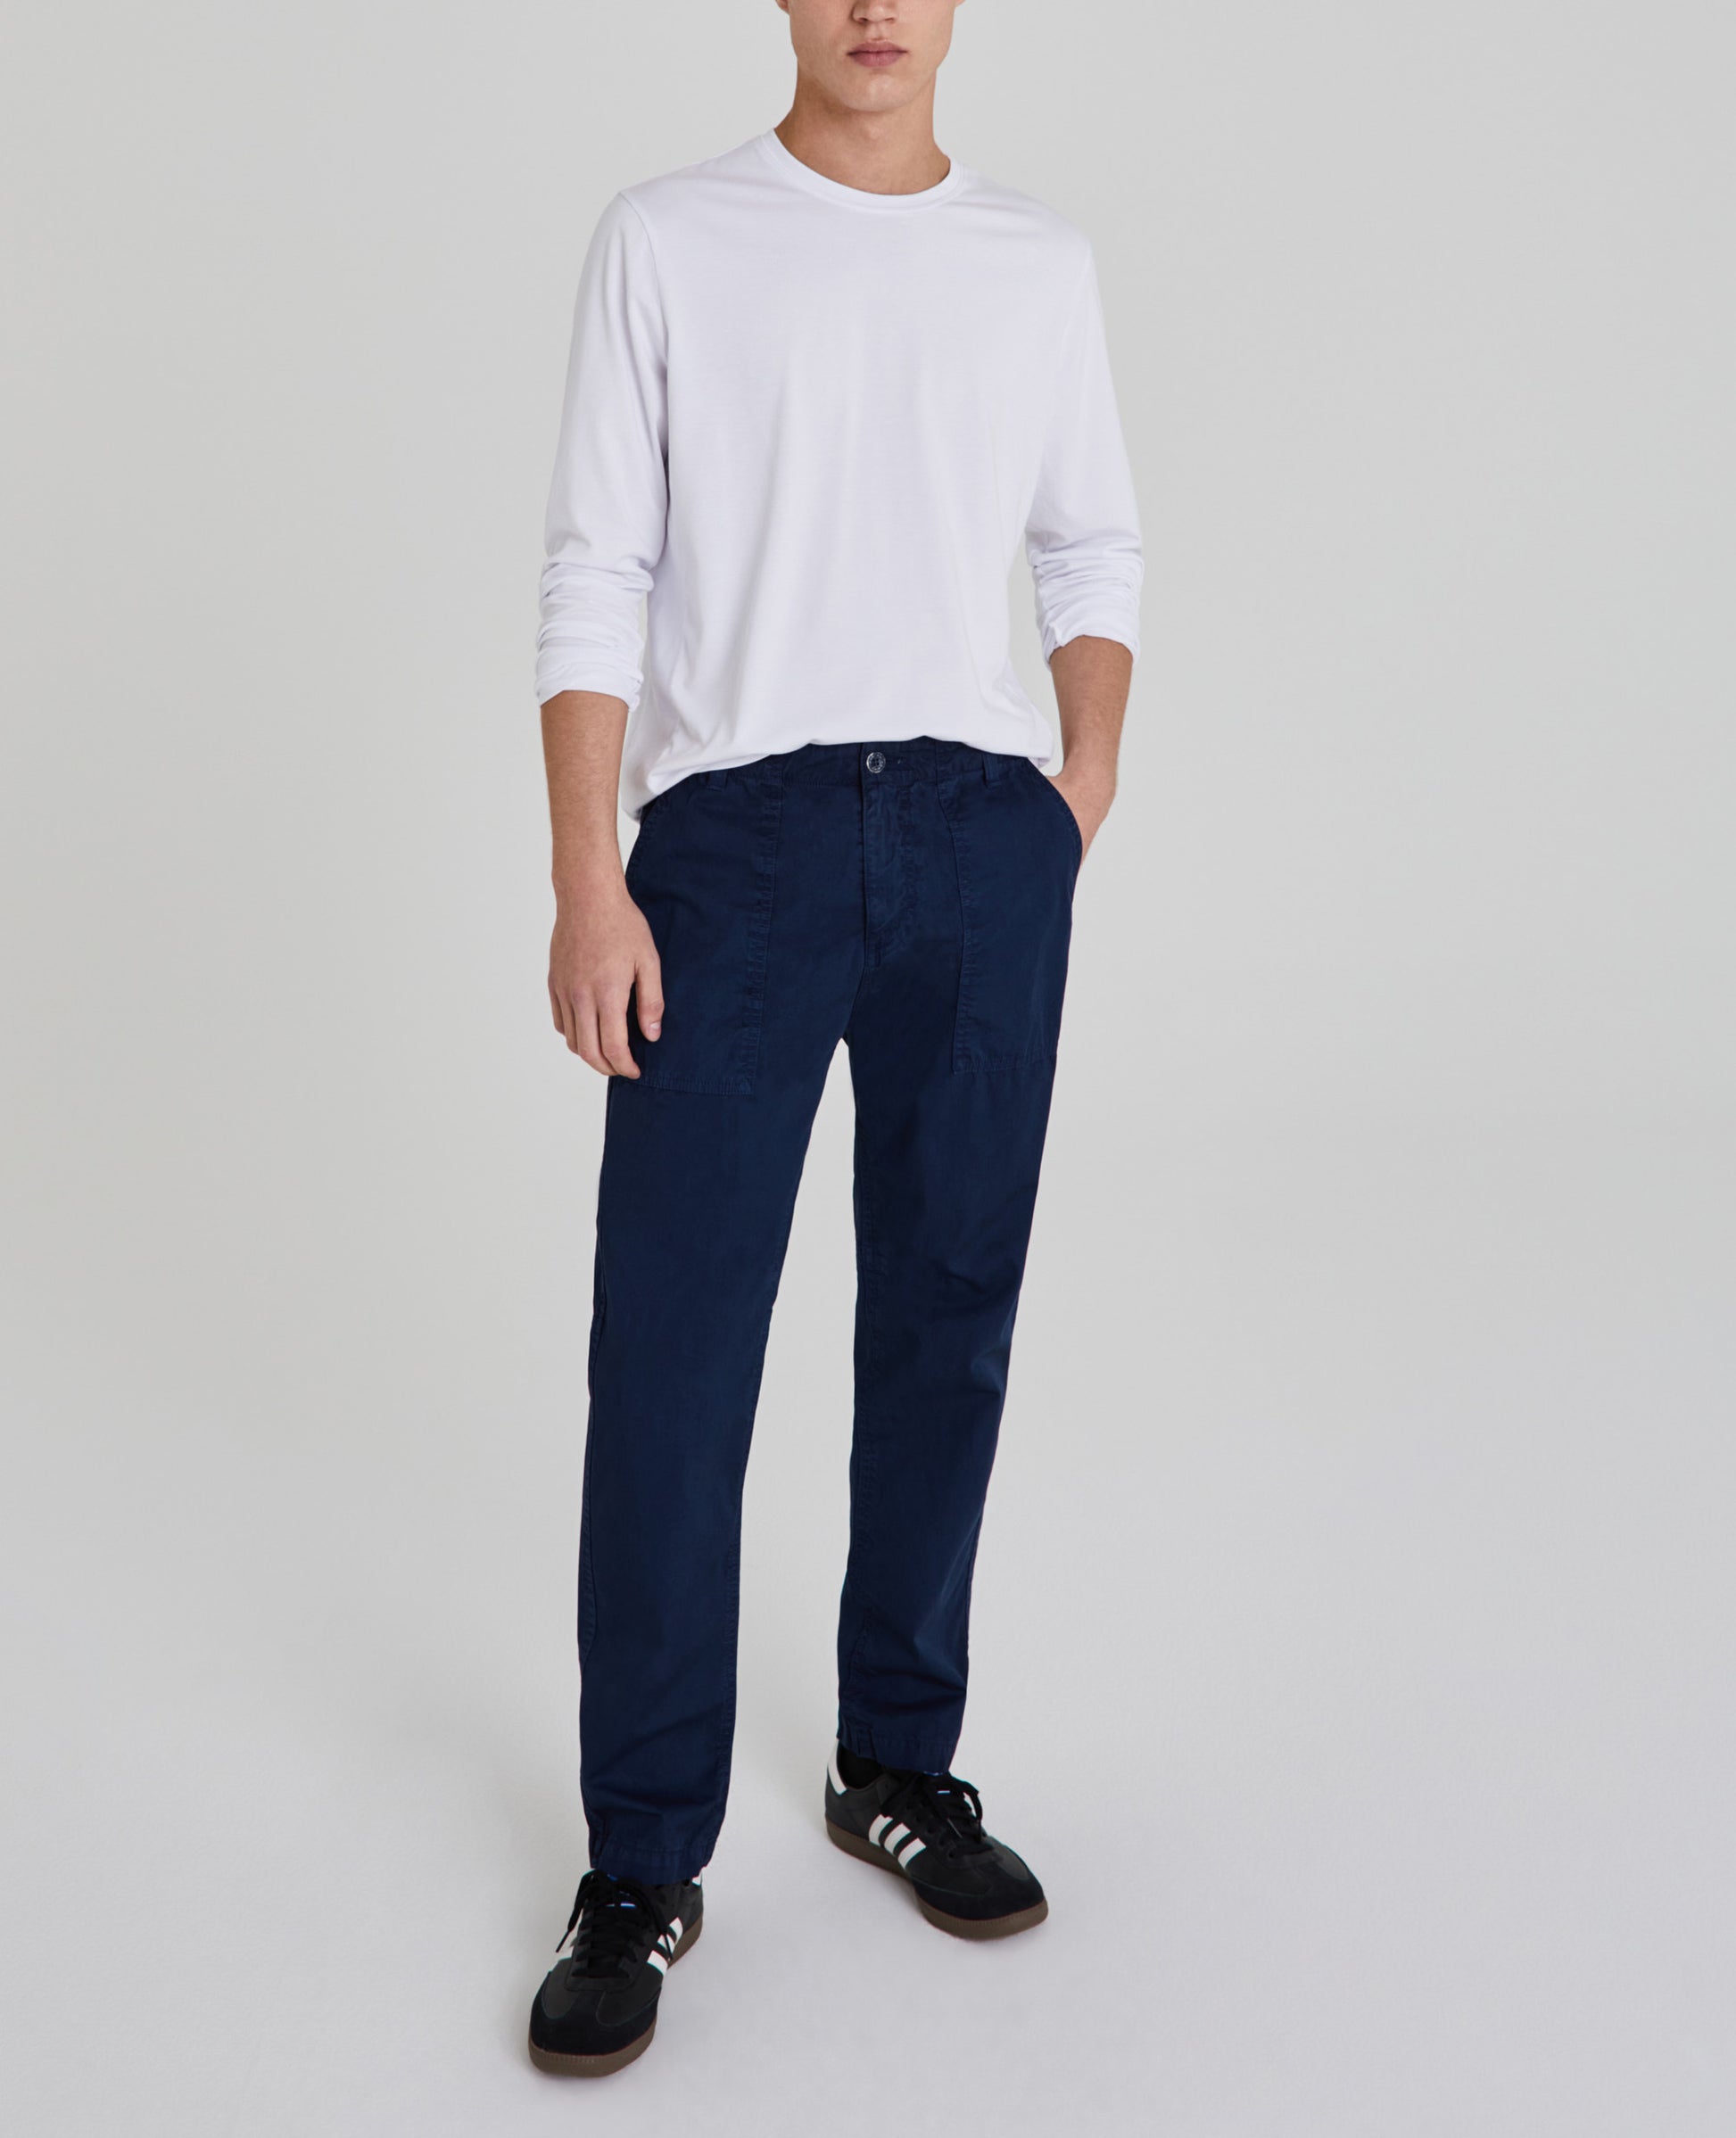 Clyfton Fatigue Sulfur Midnight Berlin Relaxed Tapered Men Bottoms Photo 1